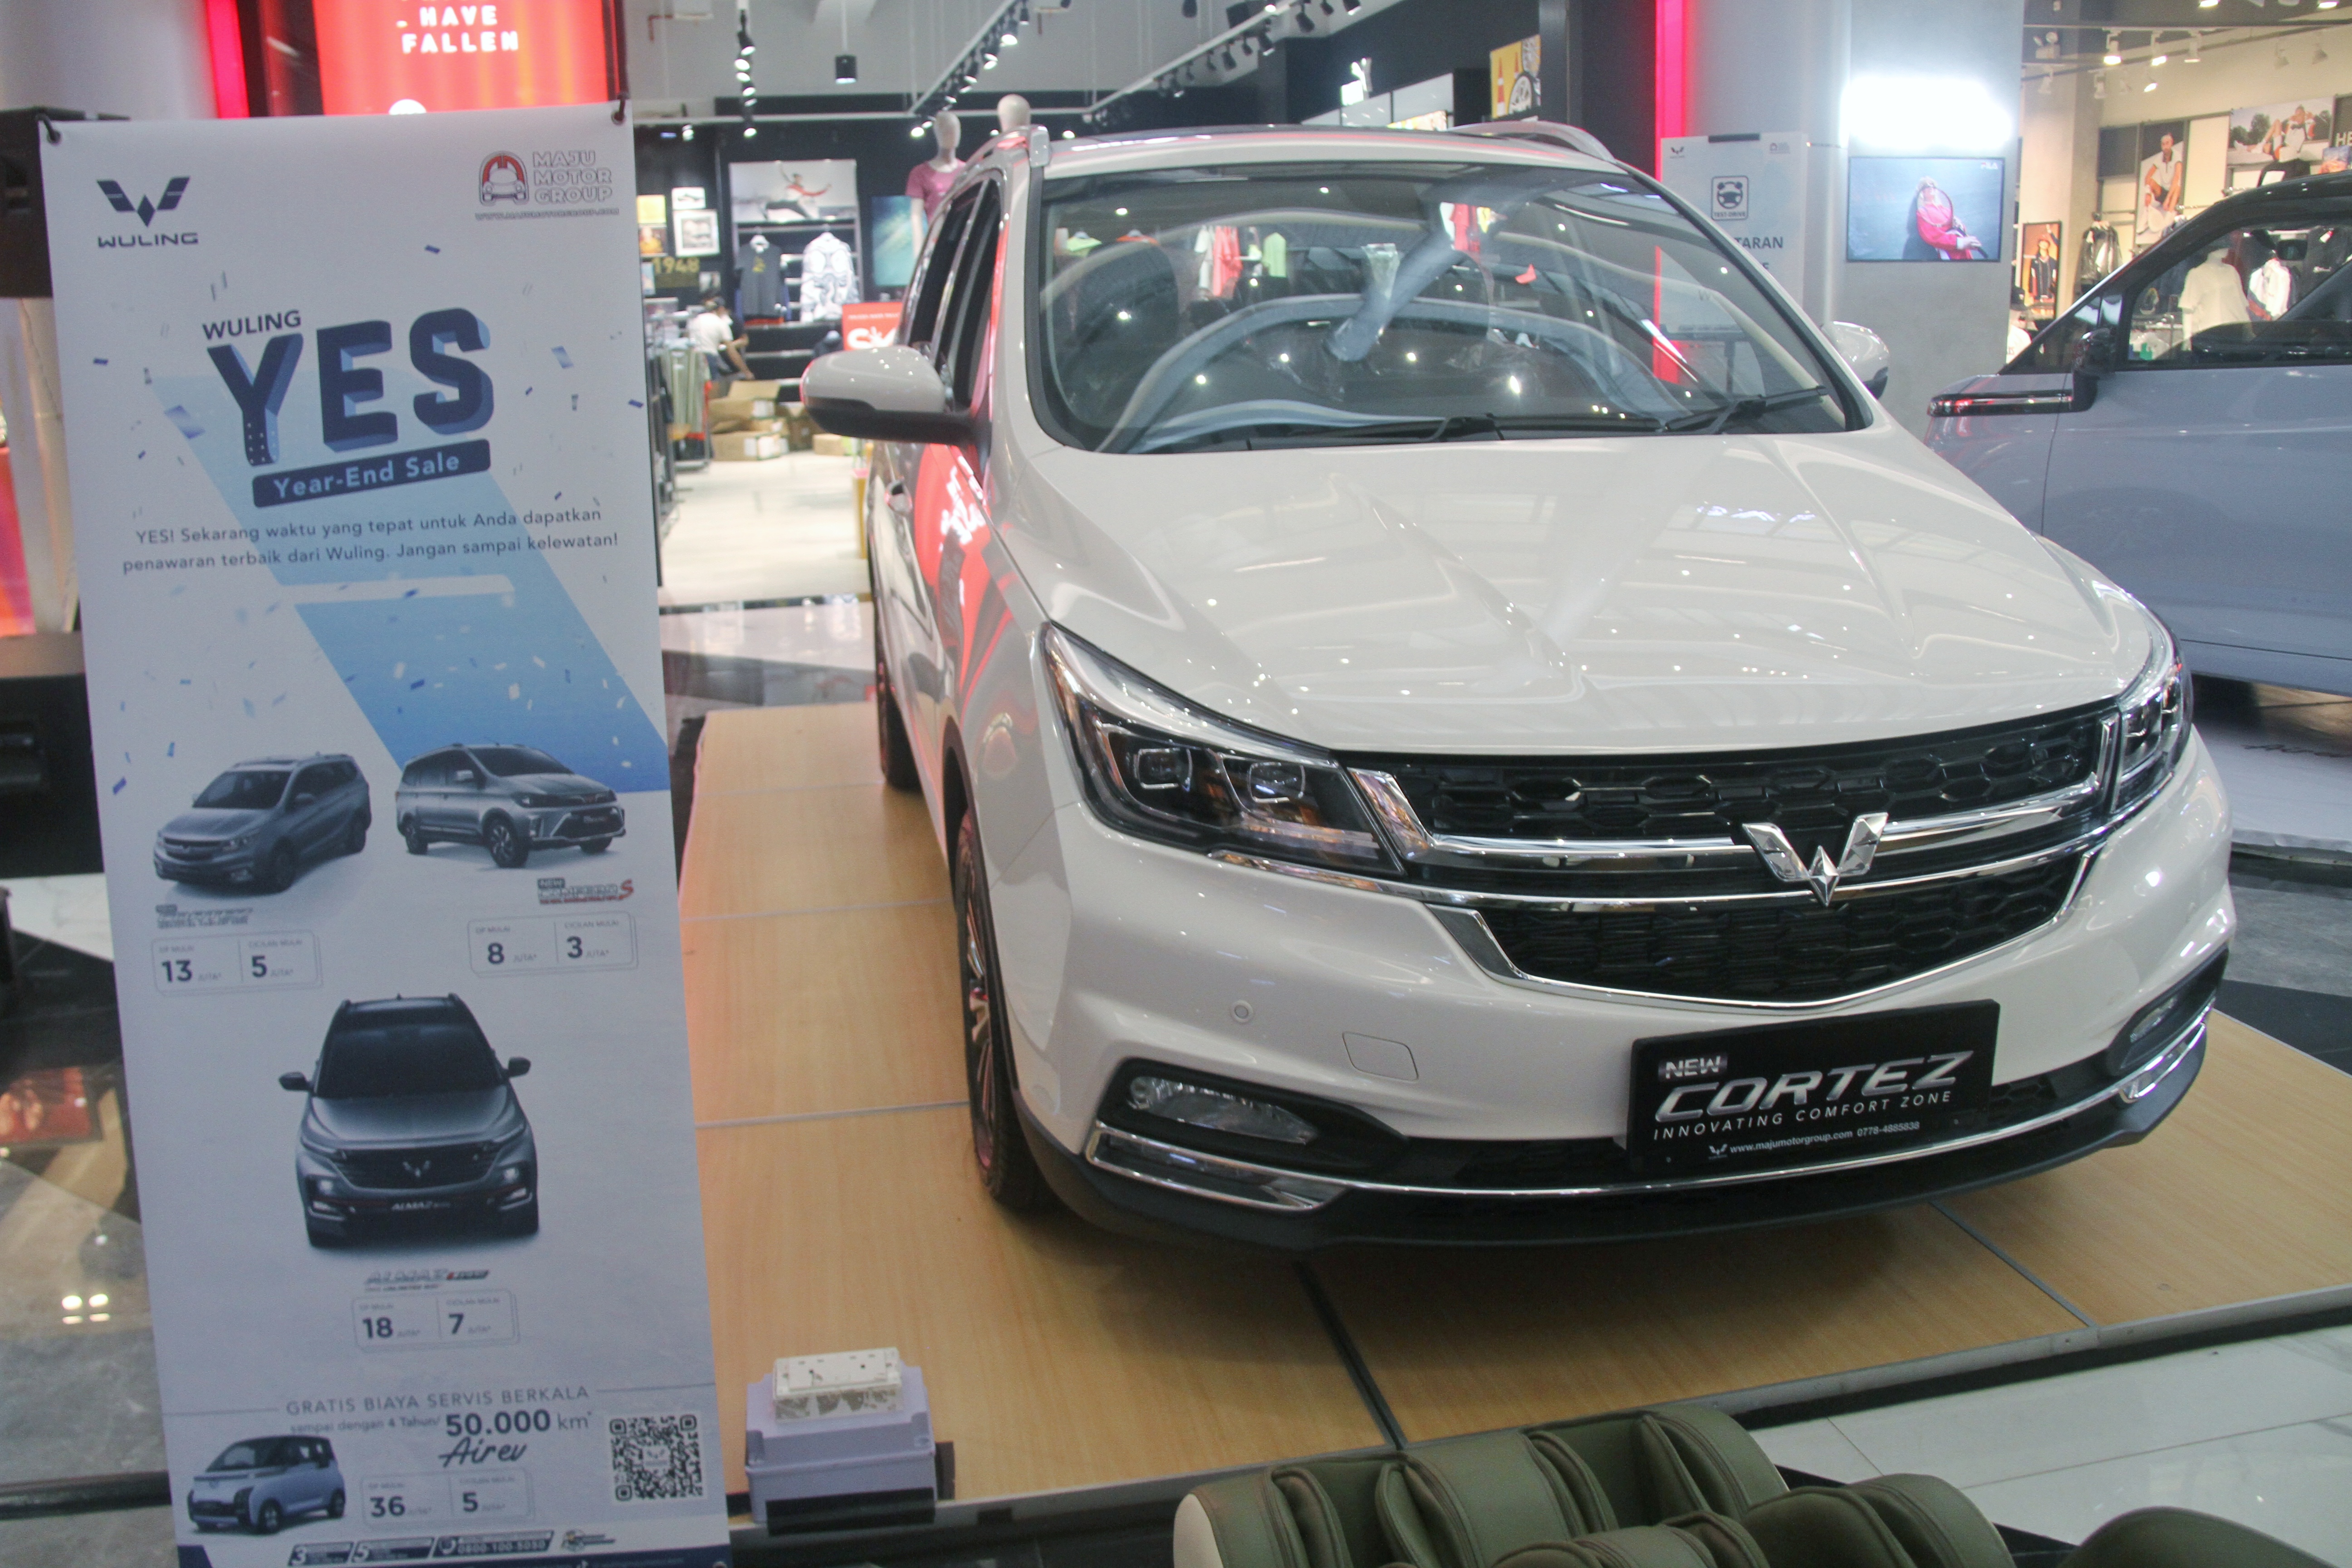 Image Wuling Celebrates End of Year Excitement with Year End Sale (YES) Promo in Batam